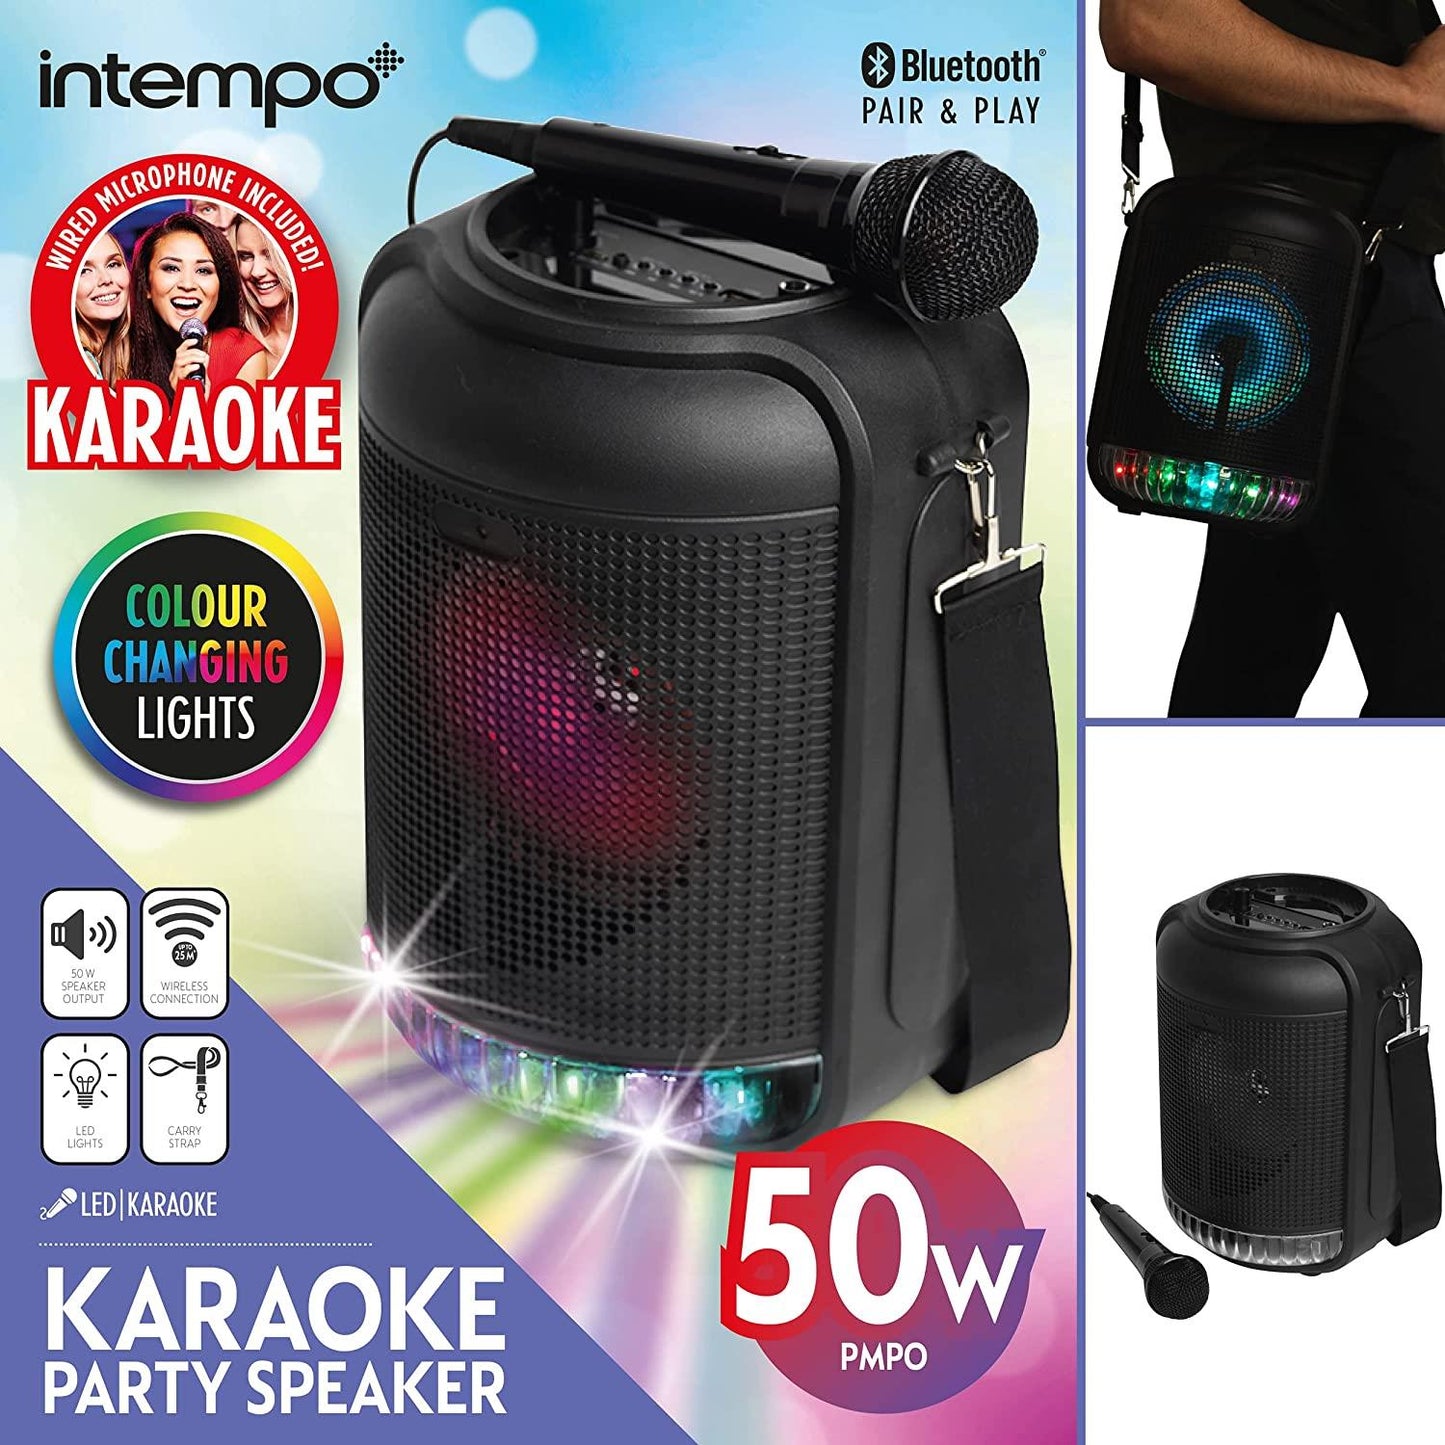 Intempo 50W LED Party Karaoke Bluetooth Speaker with Wired Microphone